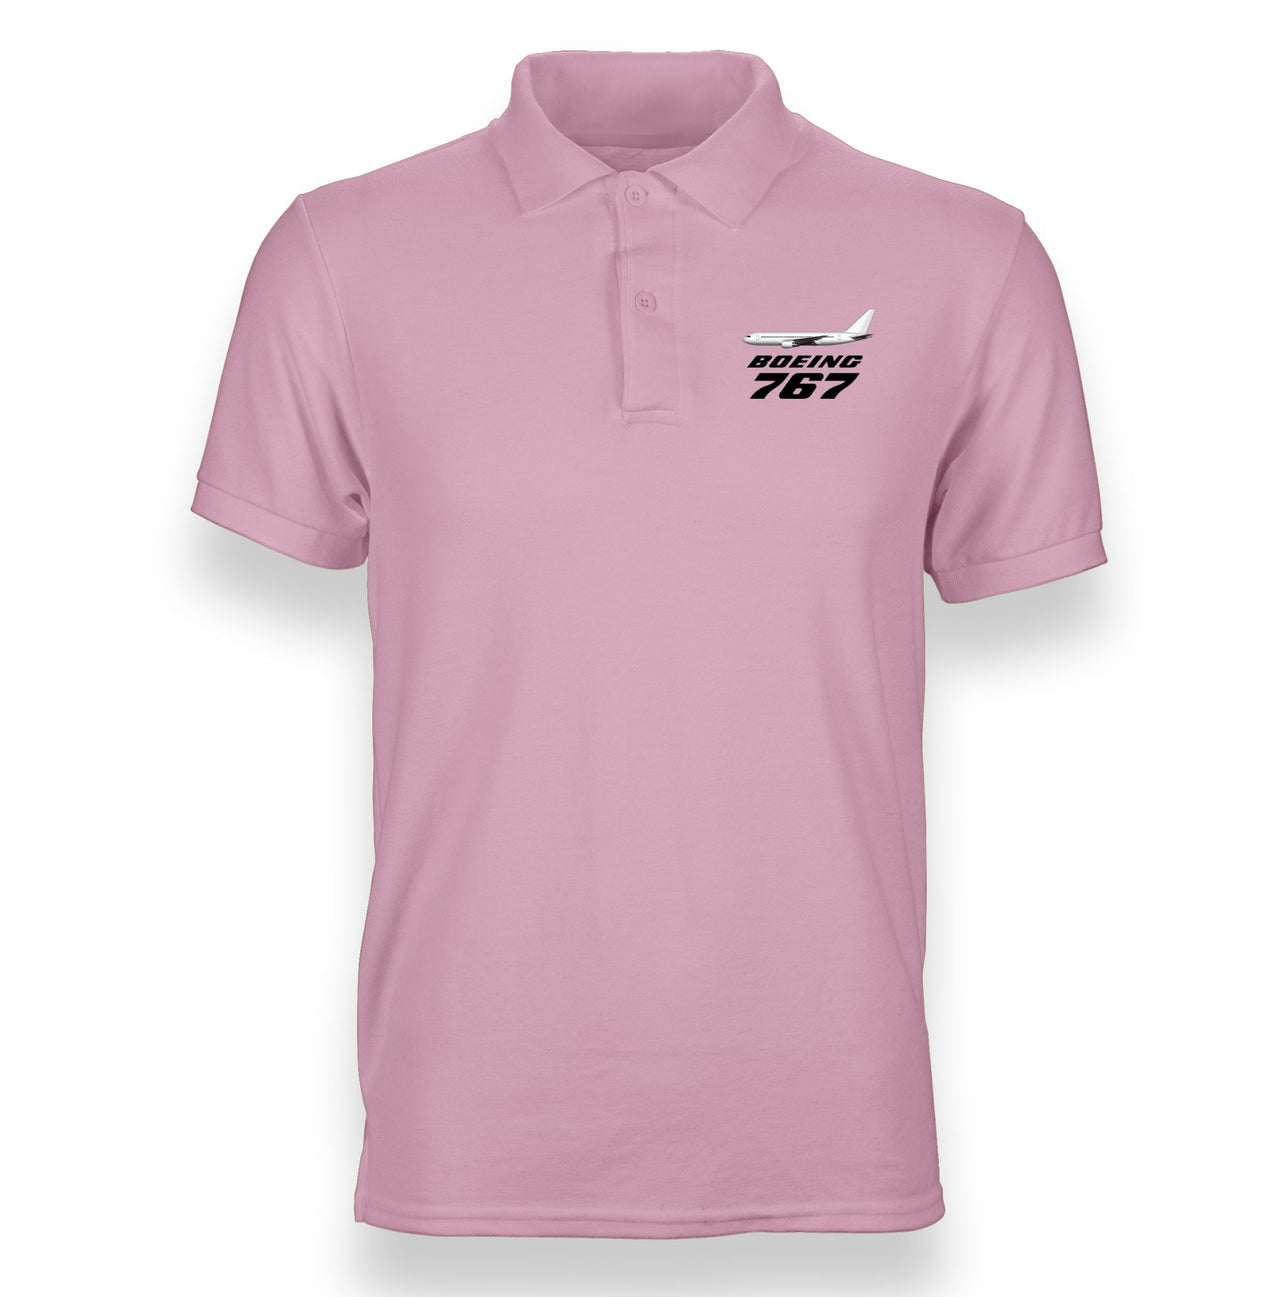 The Boeing 767 Designed "WOMEN" Polo T-Shirts